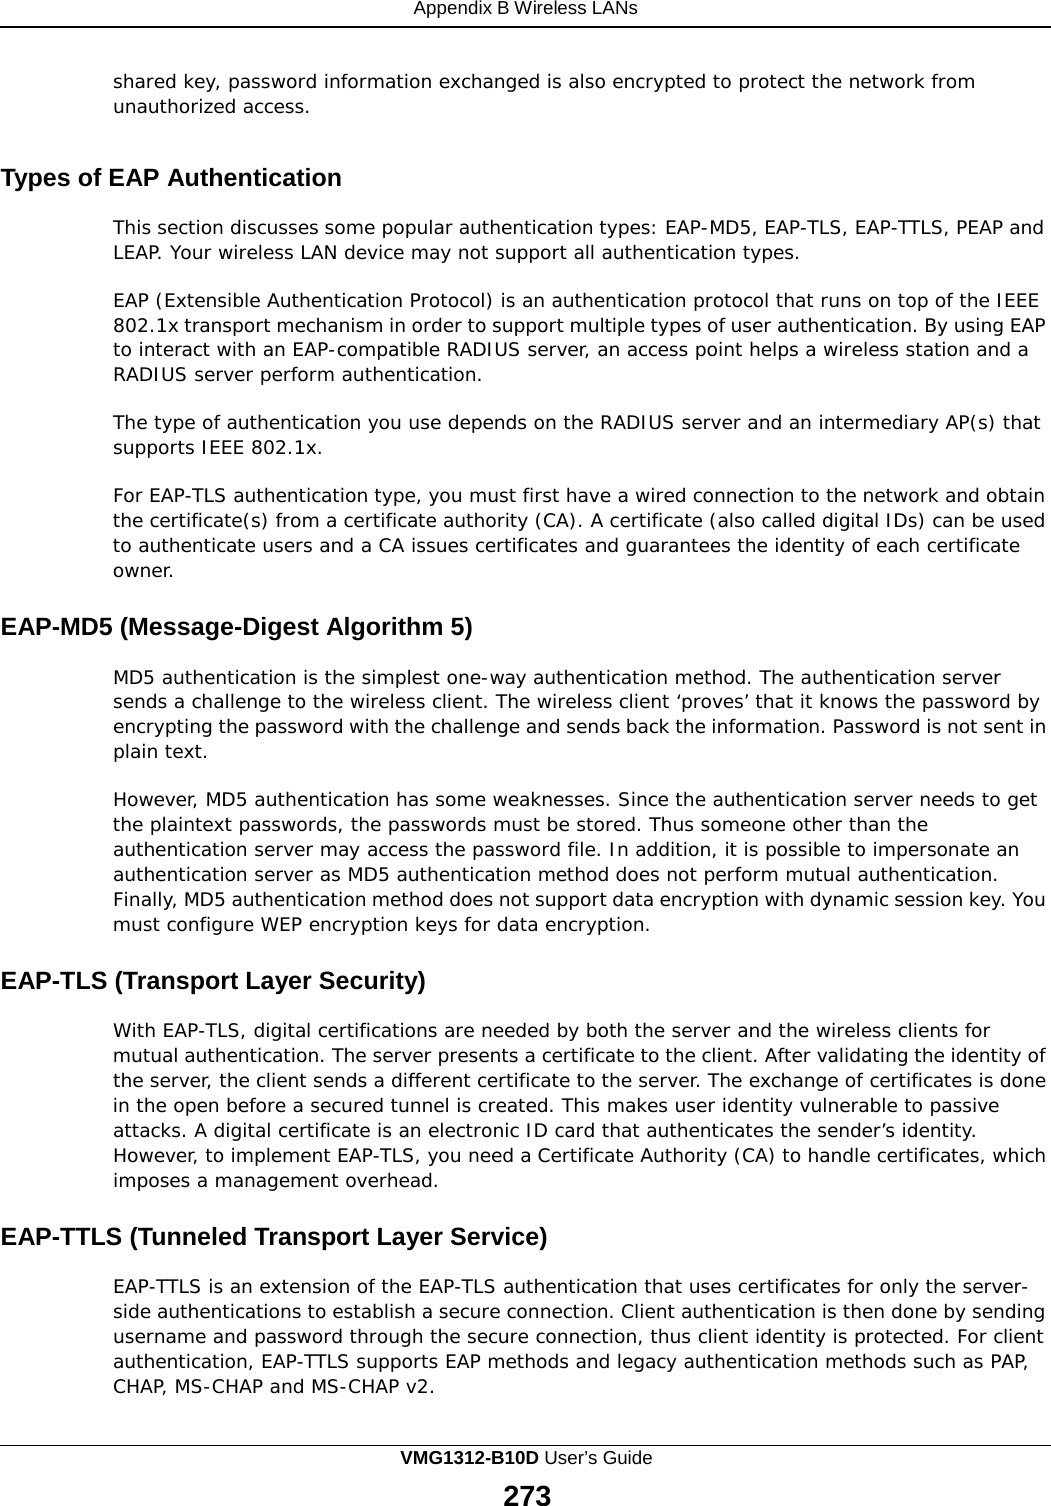 Appendix B Wireless LANs    shared key, password information exchanged is also encrypted to protect the network from unauthorized access.   Types of EAP Authentication  This section discusses some popular authentication types: EAP-MD5, EAP-TLS, EAP-TTLS, PEAP and LEAP. Your wireless LAN device may not support all authentication types.  EAP (Extensible Authentication Protocol) is an authentication protocol that runs on top of the IEEE 802.1x transport mechanism in order to support multiple types of user authentication. By using EAP to interact with an EAP-compatible RADIUS server, an access point helps a wireless station and a RADIUS server perform authentication.  The type of authentication you use depends on the RADIUS server and an intermediary AP(s) that supports IEEE 802.1x.  For EAP-TLS authentication type, you must first have a wired connection to the network and obtain the certificate(s) from a certificate authority (CA). A certificate (also called digital IDs) can be used to authenticate users and a CA issues certificates and guarantees the identity of each certificate owner.  EAP-MD5 (Message-Digest Algorithm 5)  MD5 authentication is the simplest one-way authentication method. The authentication server sends a challenge to the wireless client. The wireless client ‘proves’ that it knows the password by encrypting the password with the challenge and sends back the information. Password is not sent in plain text.  However, MD5 authentication has some weaknesses. Since the authentication server needs to get the plaintext passwords, the passwords must be stored. Thus someone other than the authentication server may access the password file. In addition, it is possible to impersonate an authentication server as MD5 authentication method does not perform mutual authentication. Finally, MD5 authentication method does not support data encryption with dynamic session key. You must configure WEP encryption keys for data encryption.  EAP-TLS (Transport Layer Security)  With EAP-TLS, digital certifications are needed by both the server and the wireless clients for mutual authentication. The server presents a certificate to the client. After validating the identity of the server, the client sends a different certificate to the server. The exchange of certificates is done in the open before a secured tunnel is created. This makes user identity vulnerable to passive attacks. A digital certificate is an electronic ID card that authenticates the sender’s identity. However, to implement EAP-TLS, you need a Certificate Authority (CA) to handle certificates, which imposes a management overhead.  EAP-TTLS (Tunneled Transport Layer Service)  EAP-TTLS is an extension of the EAP-TLS authentication that uses certificates for only the server- side authentications to establish a secure connection. Client authentication is then done by sending username and password through the secure connection, thus client identity is protected. For client authentication, EAP-TTLS supports EAP methods and legacy authentication methods such as PAP, CHAP, MS-CHAP and MS-CHAP v2. VMG1312-B10D User’s Guide 273  